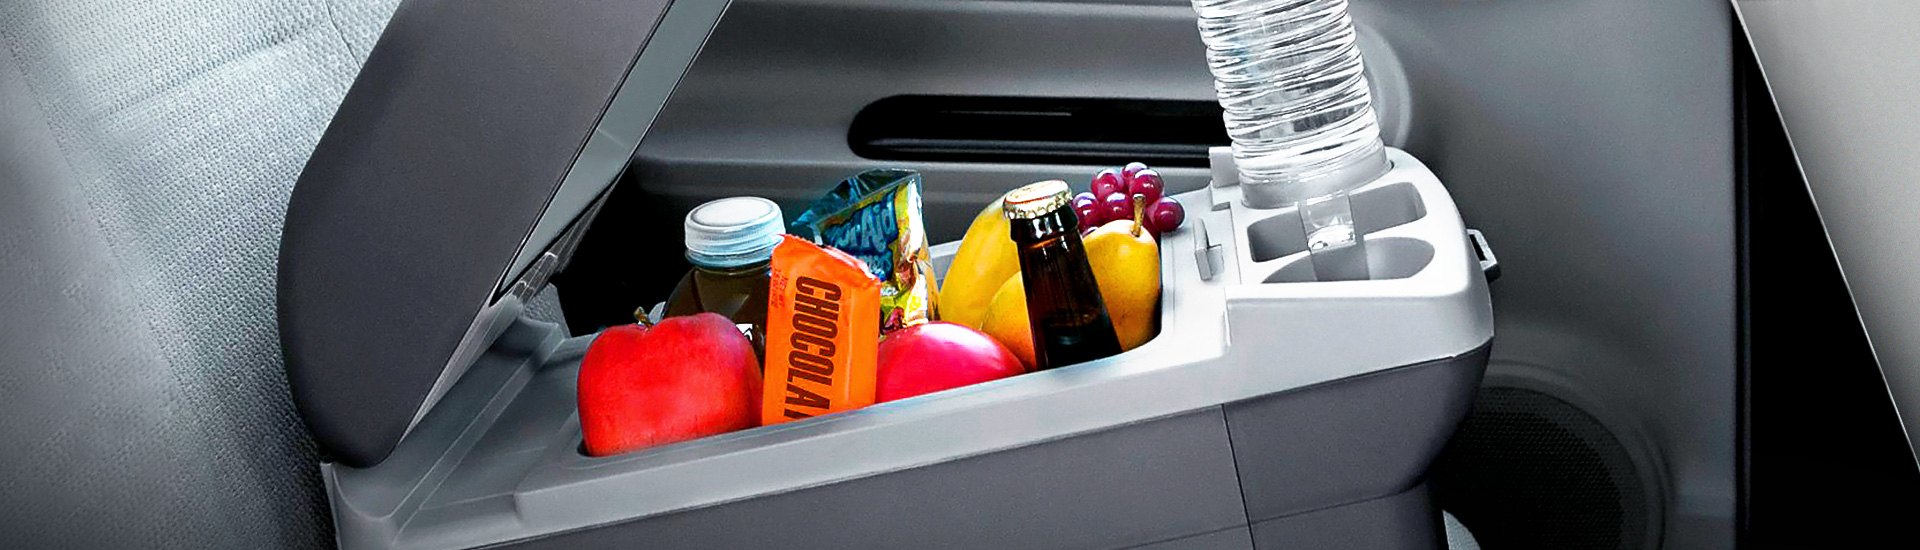 RV Refrigerators Keep Food and Drink Cold and Fresh While on the Road